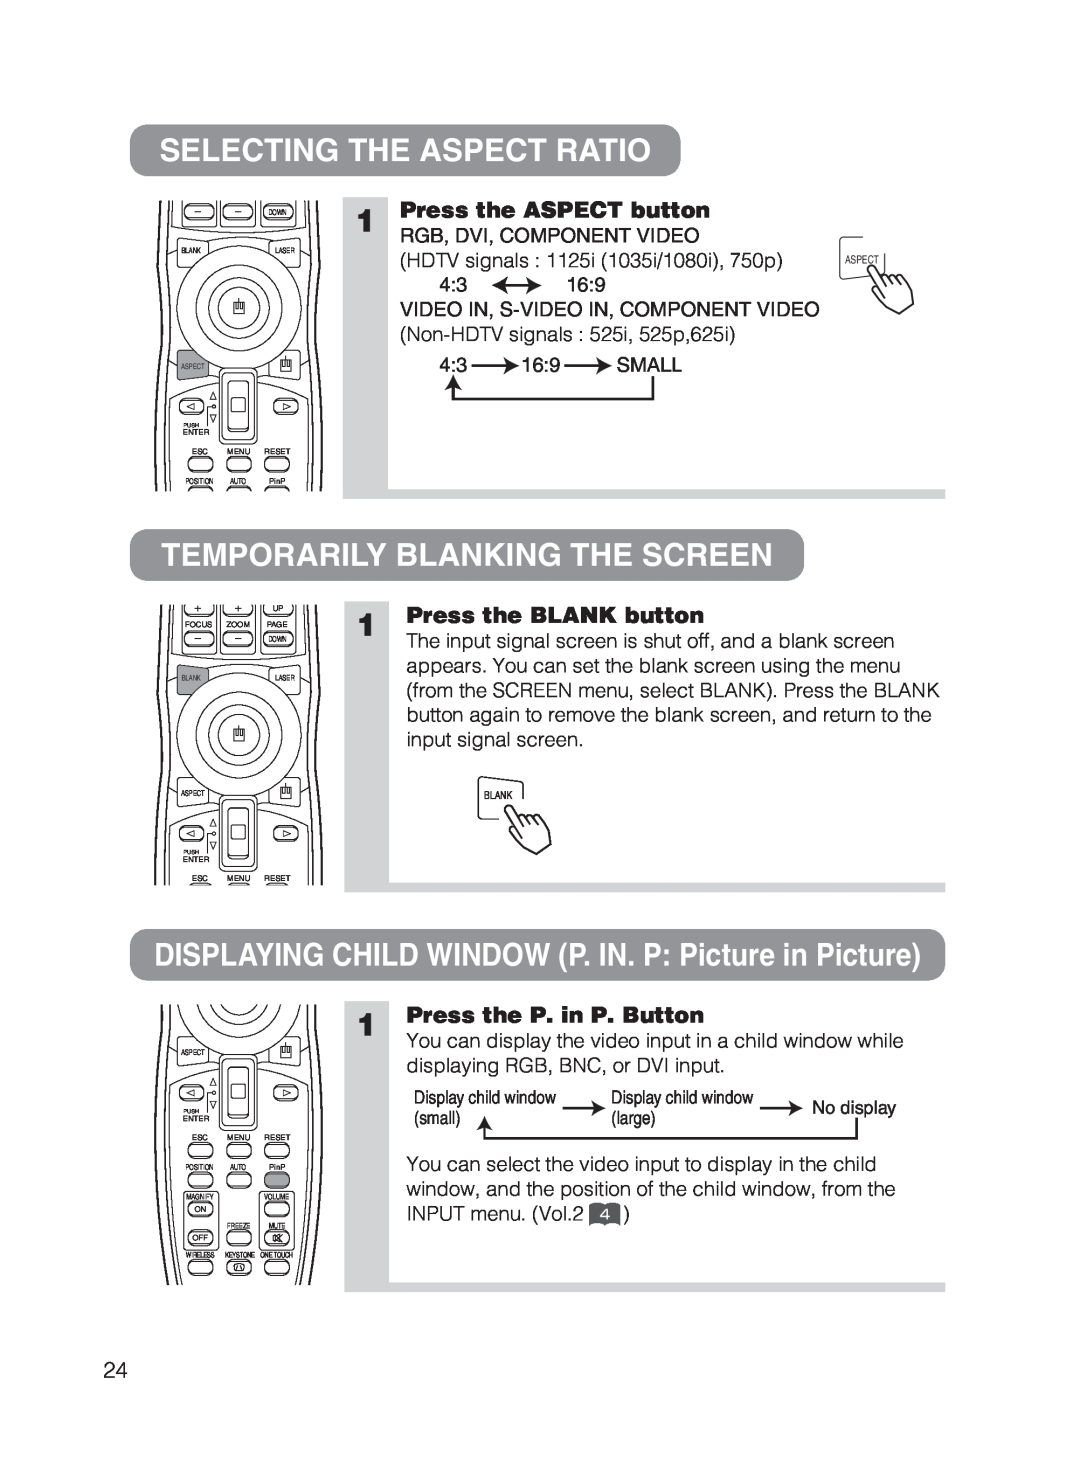 Hitachi CP-X870 user manual Selecting The Aspect Ratio, Temporarily Blanking The Screen, Press the ASPECT button 